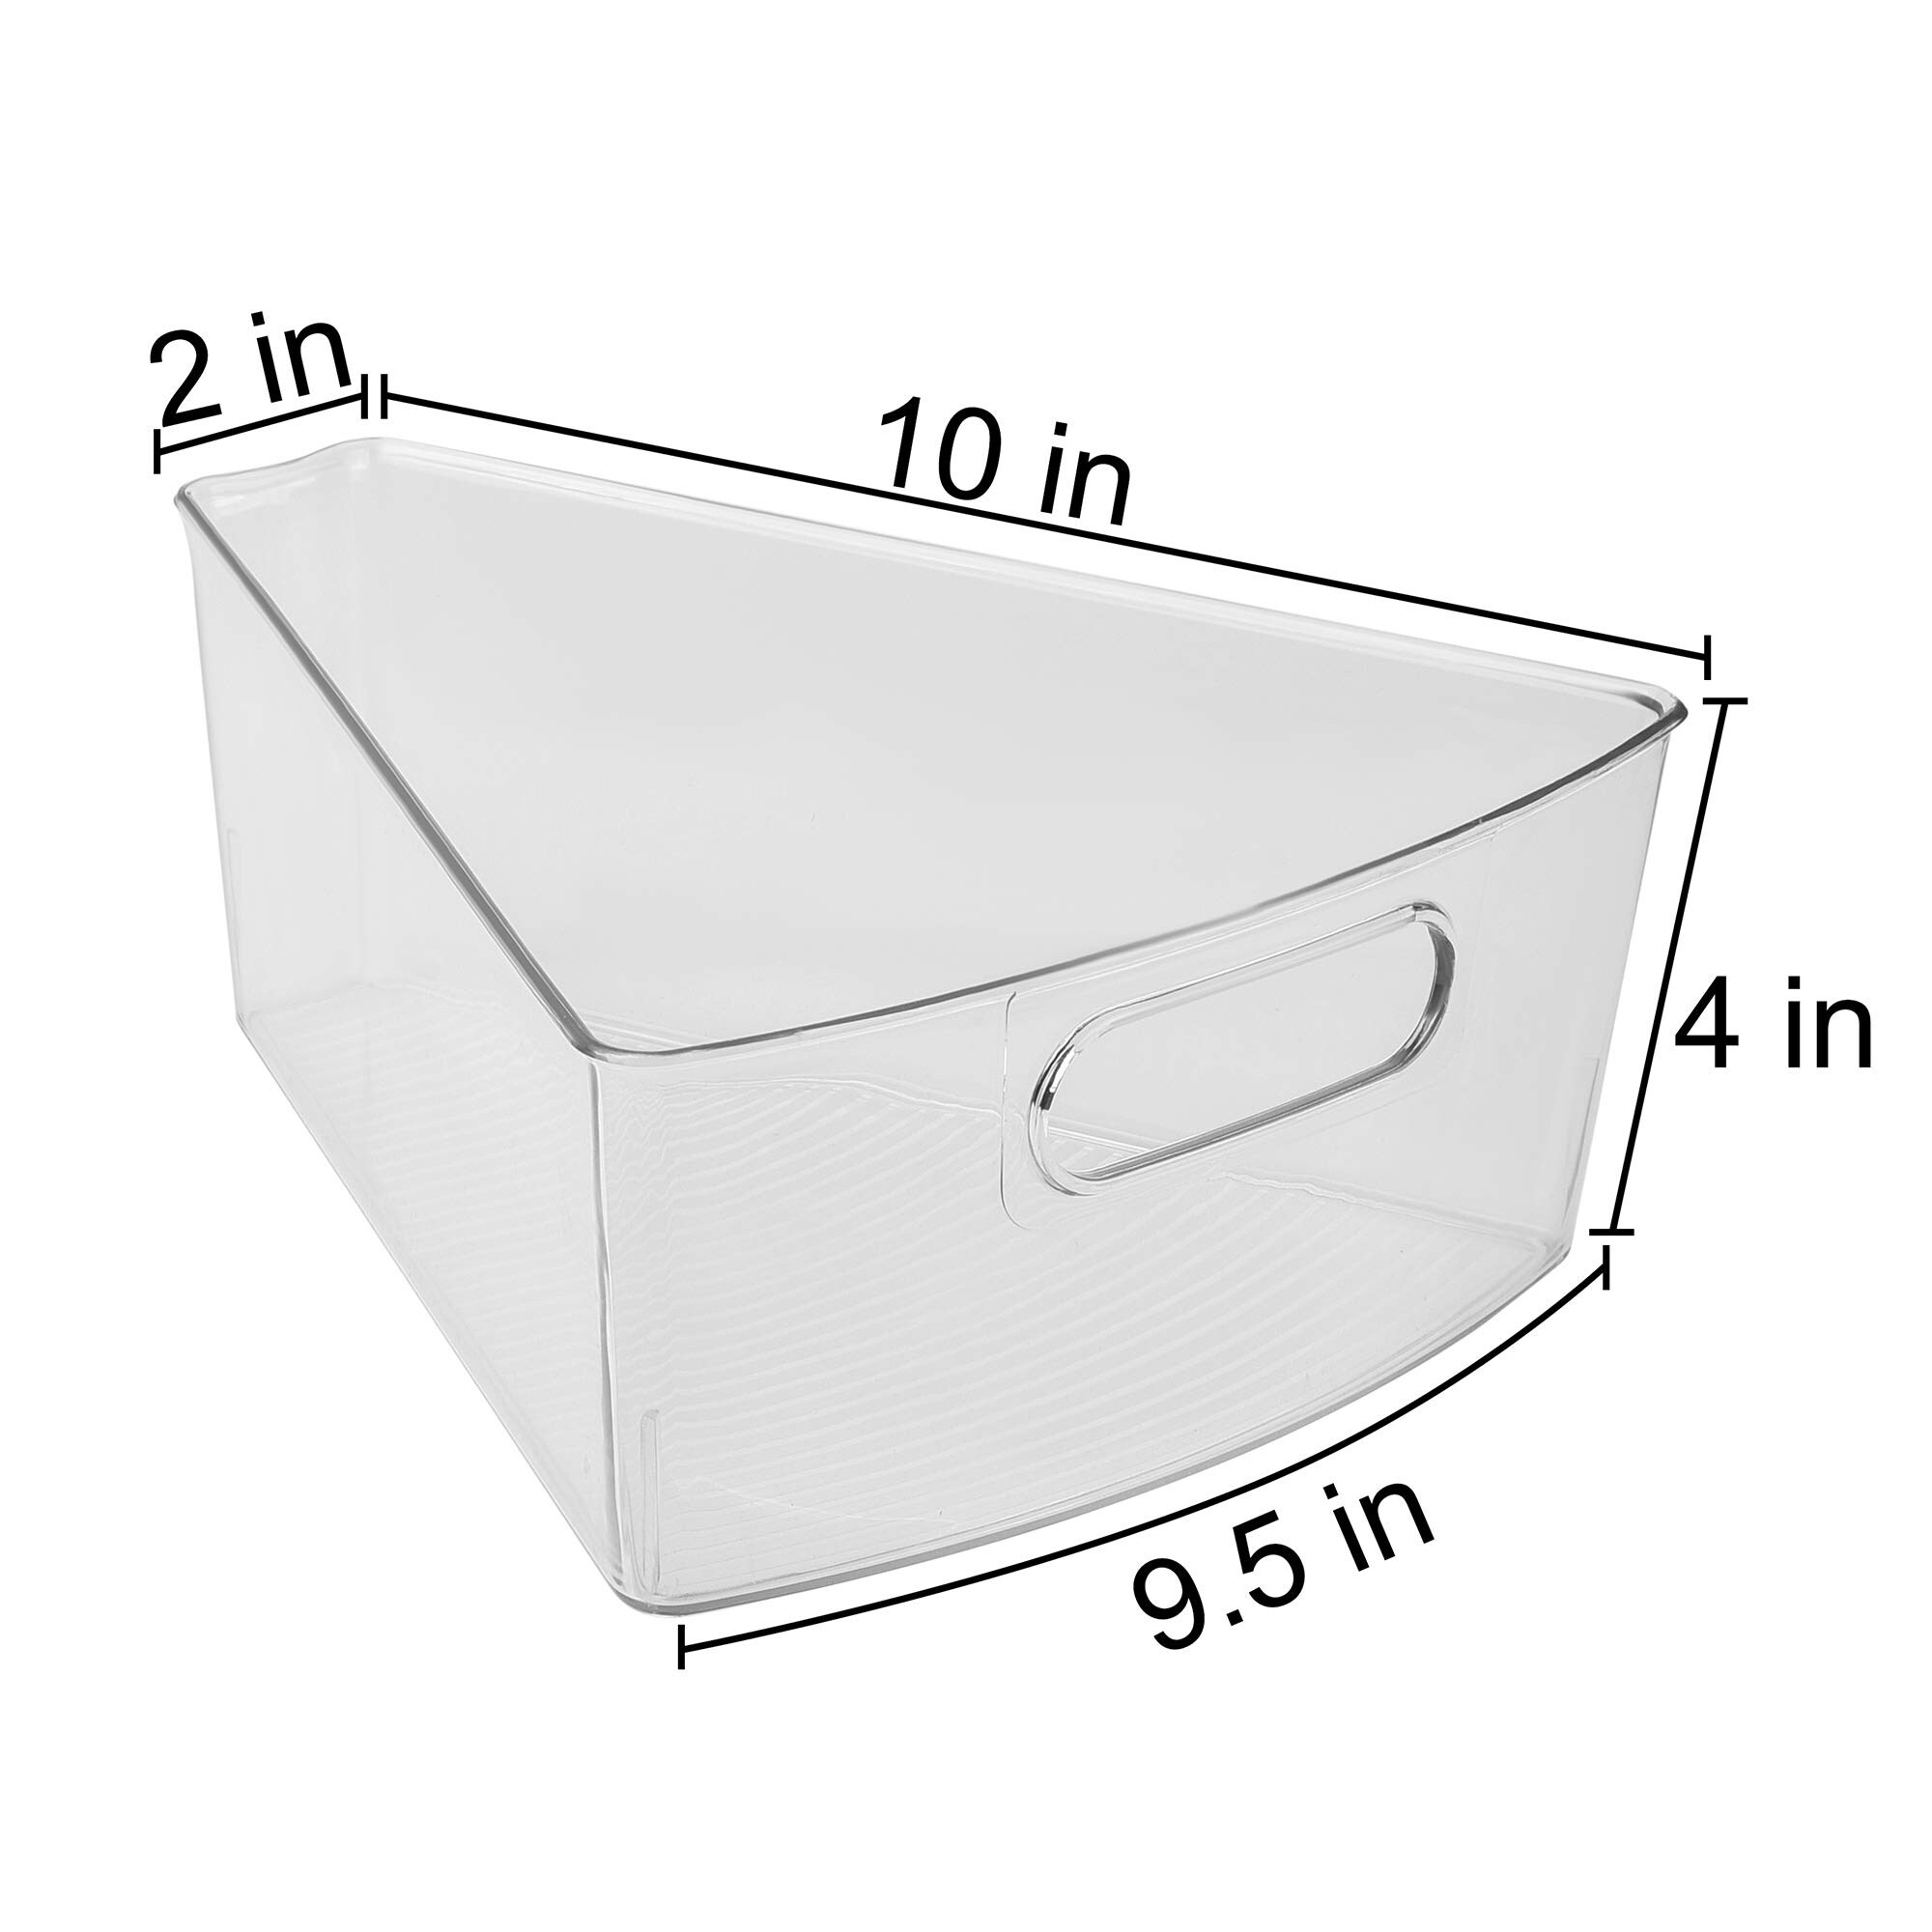 https://ak1.ostkcdn.com/images/products/is/images/direct/05d953b7d1eac20b6c3f4046d8a7bbd39cebf591/4-Pack-Lazy-Susan-Organizer-w--Front-Handle%2C-Wedge-Storage-Bin-Cabinet-Container.jpg